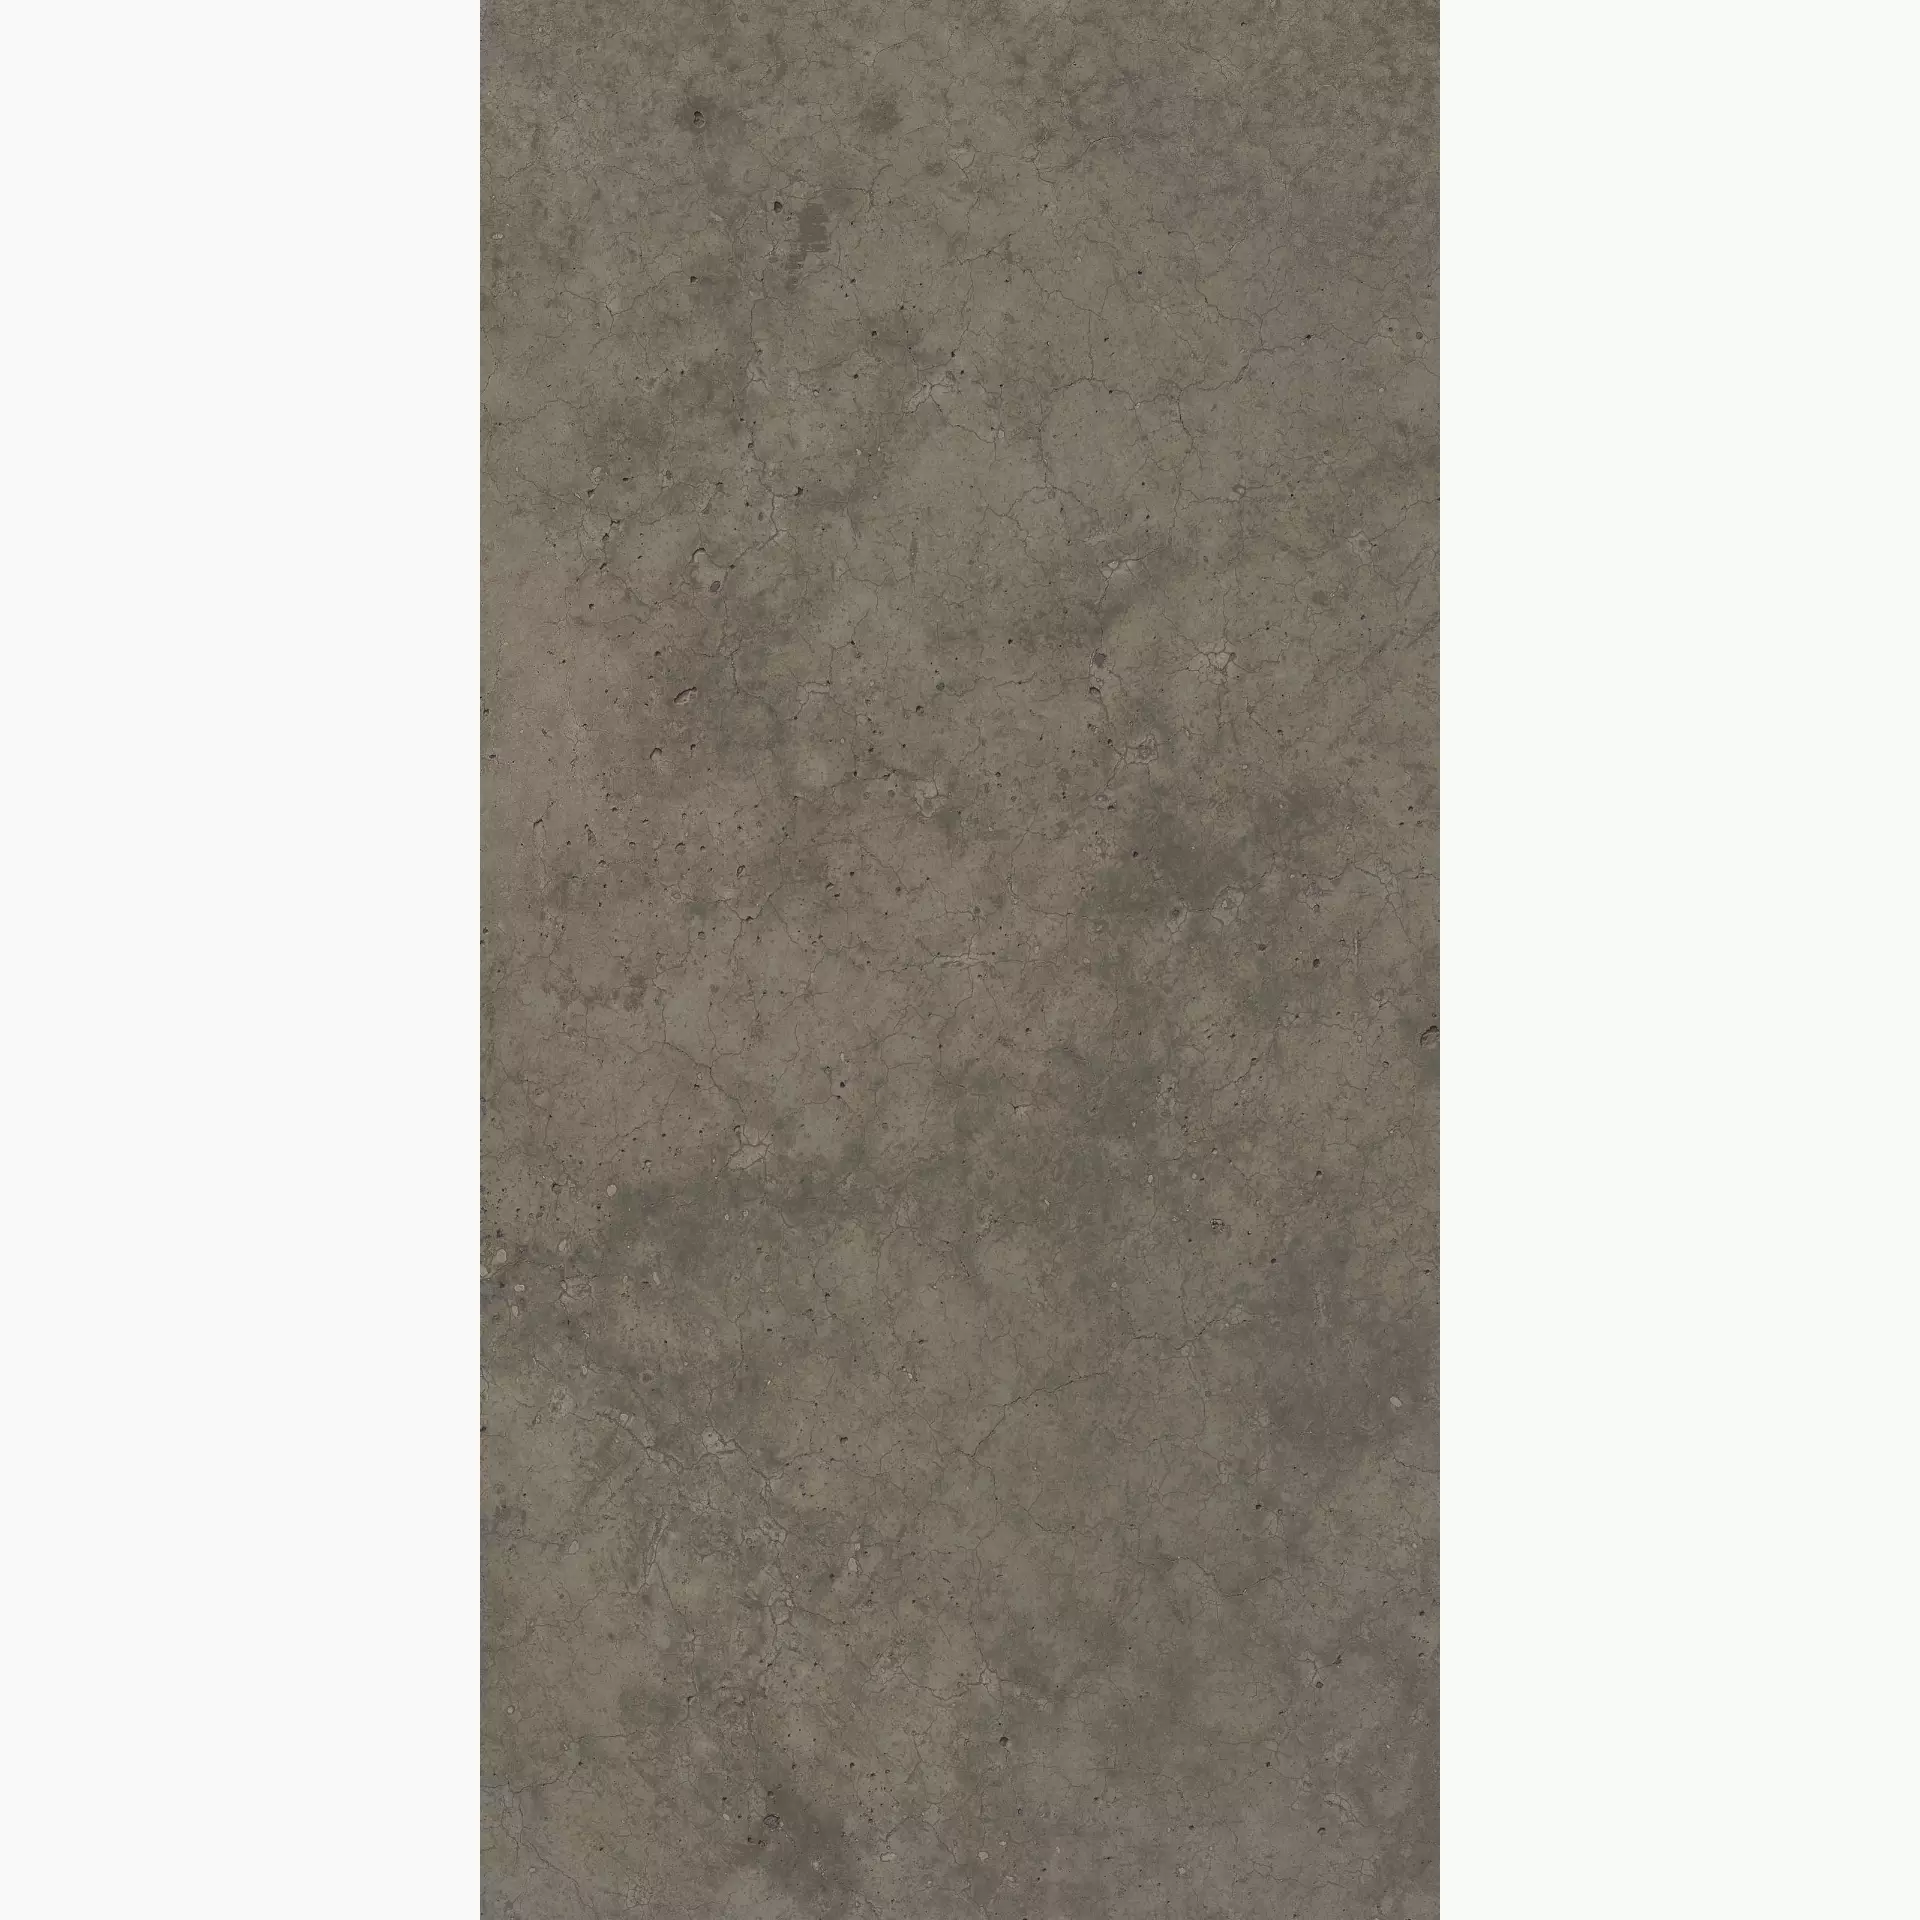 Flaviker Hyper Taupe Naturale PF60002453 60x120cm rectified 8,5mm